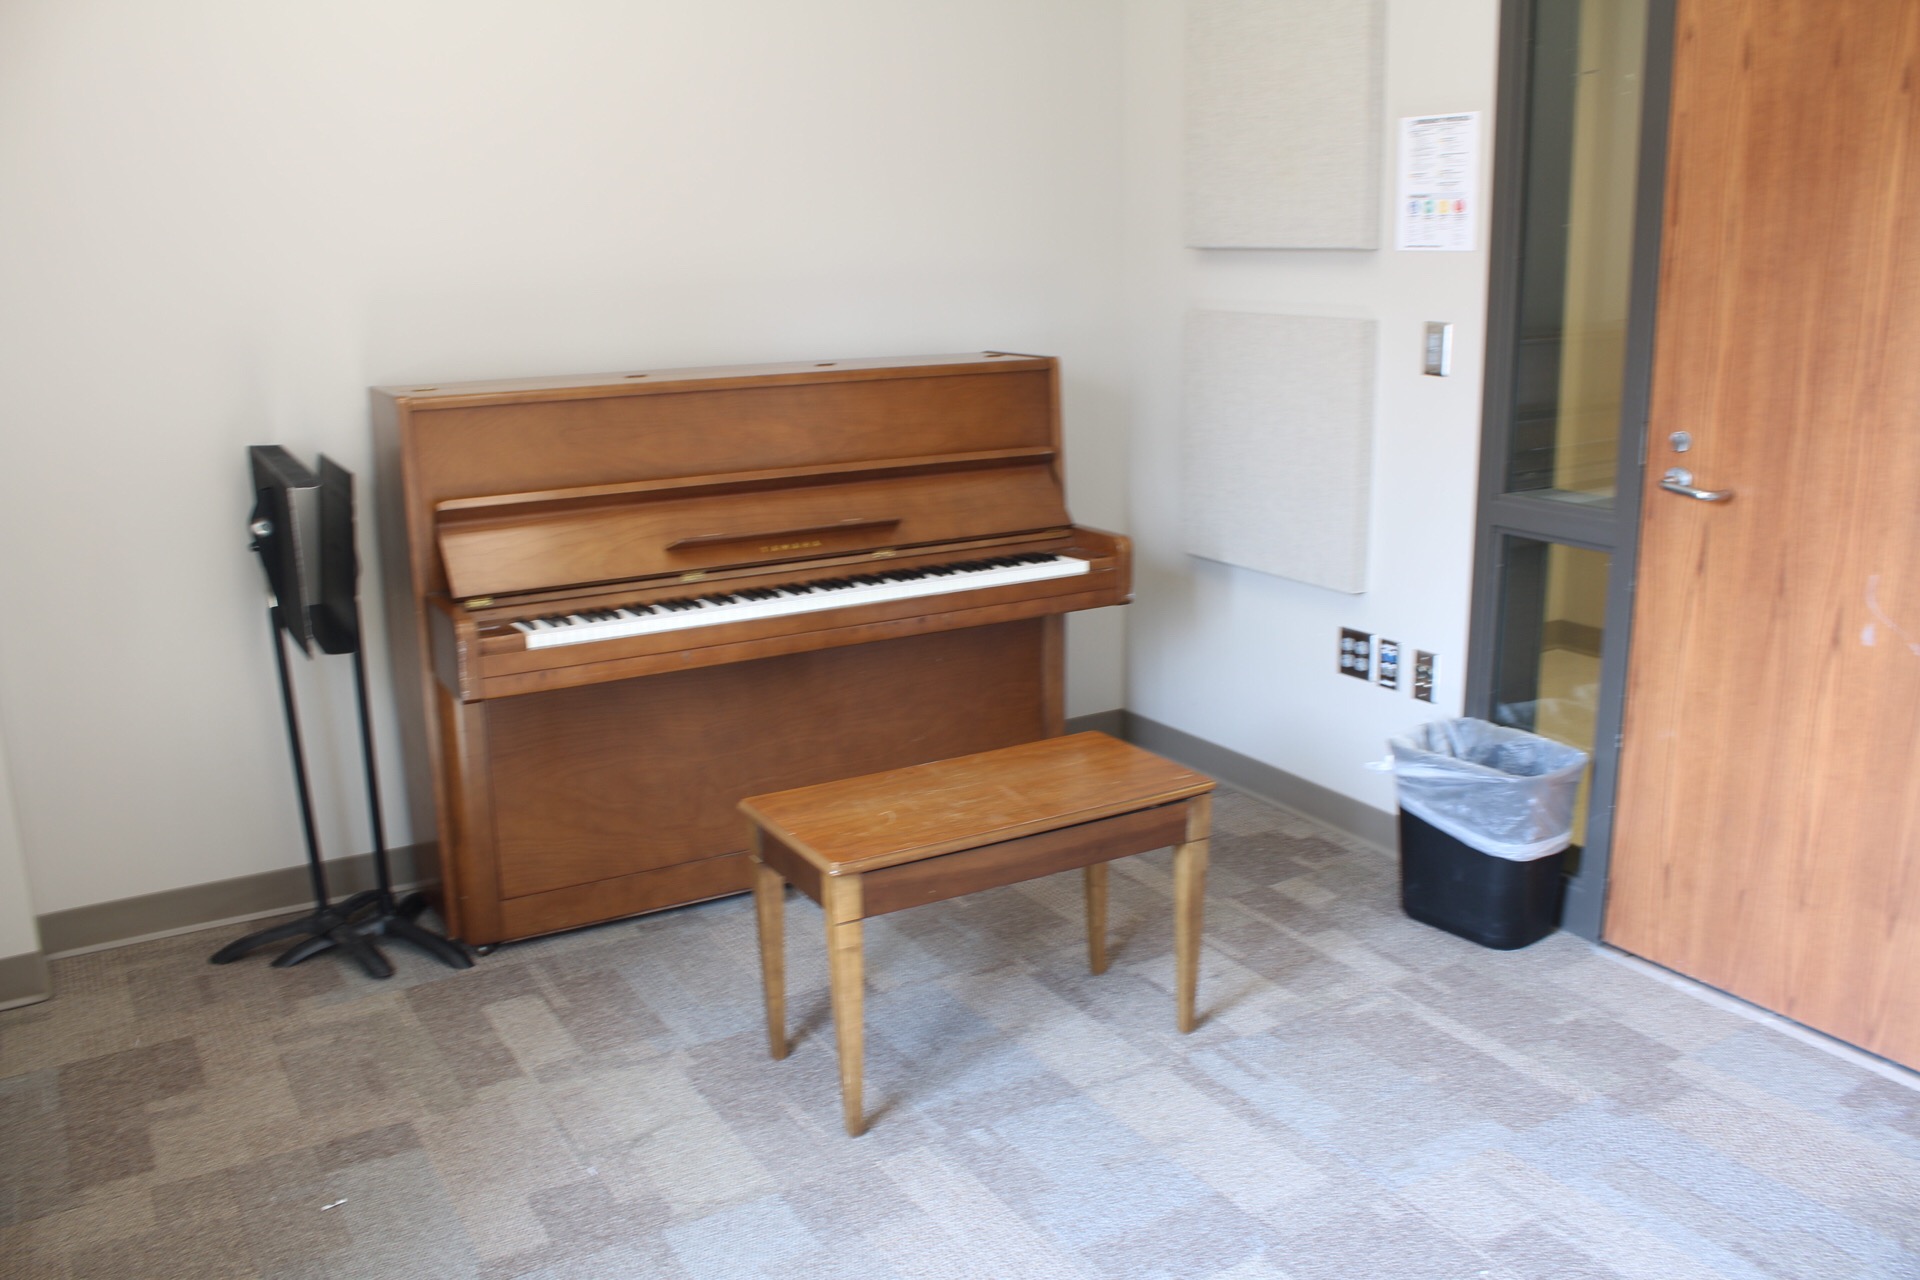 Jindra Fine Arts Practice Room with a piano, bench and a music stand.